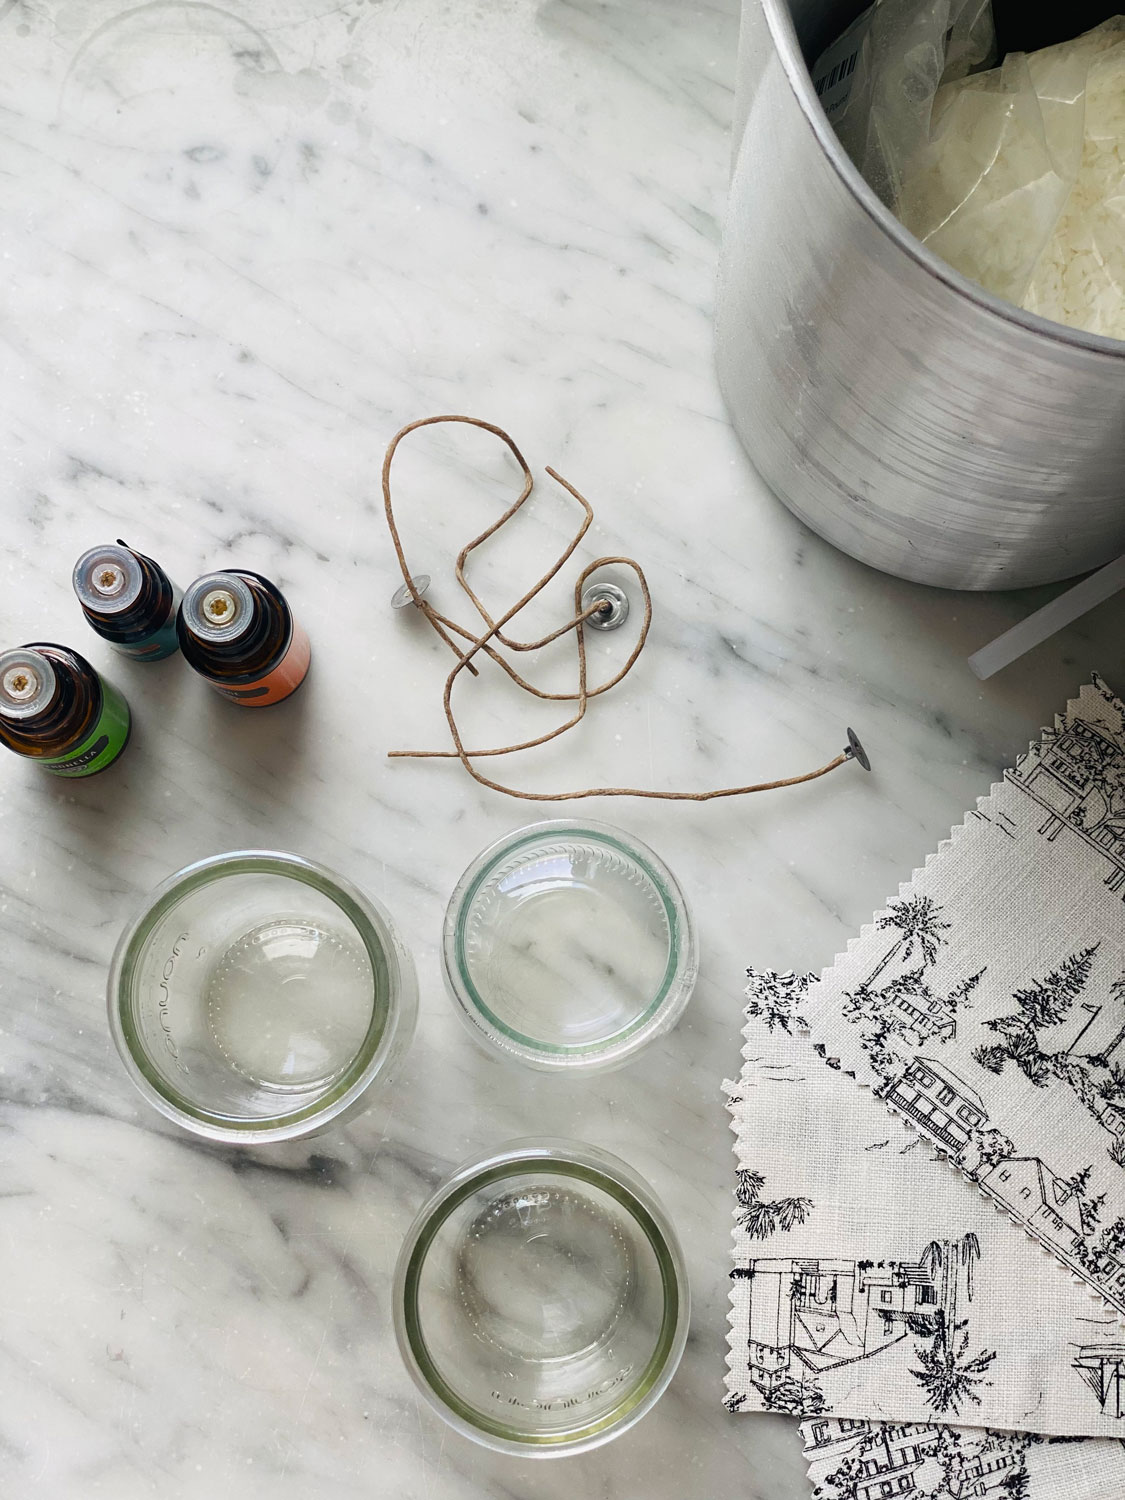 Minimal Candle Making Supplies on marble countertop